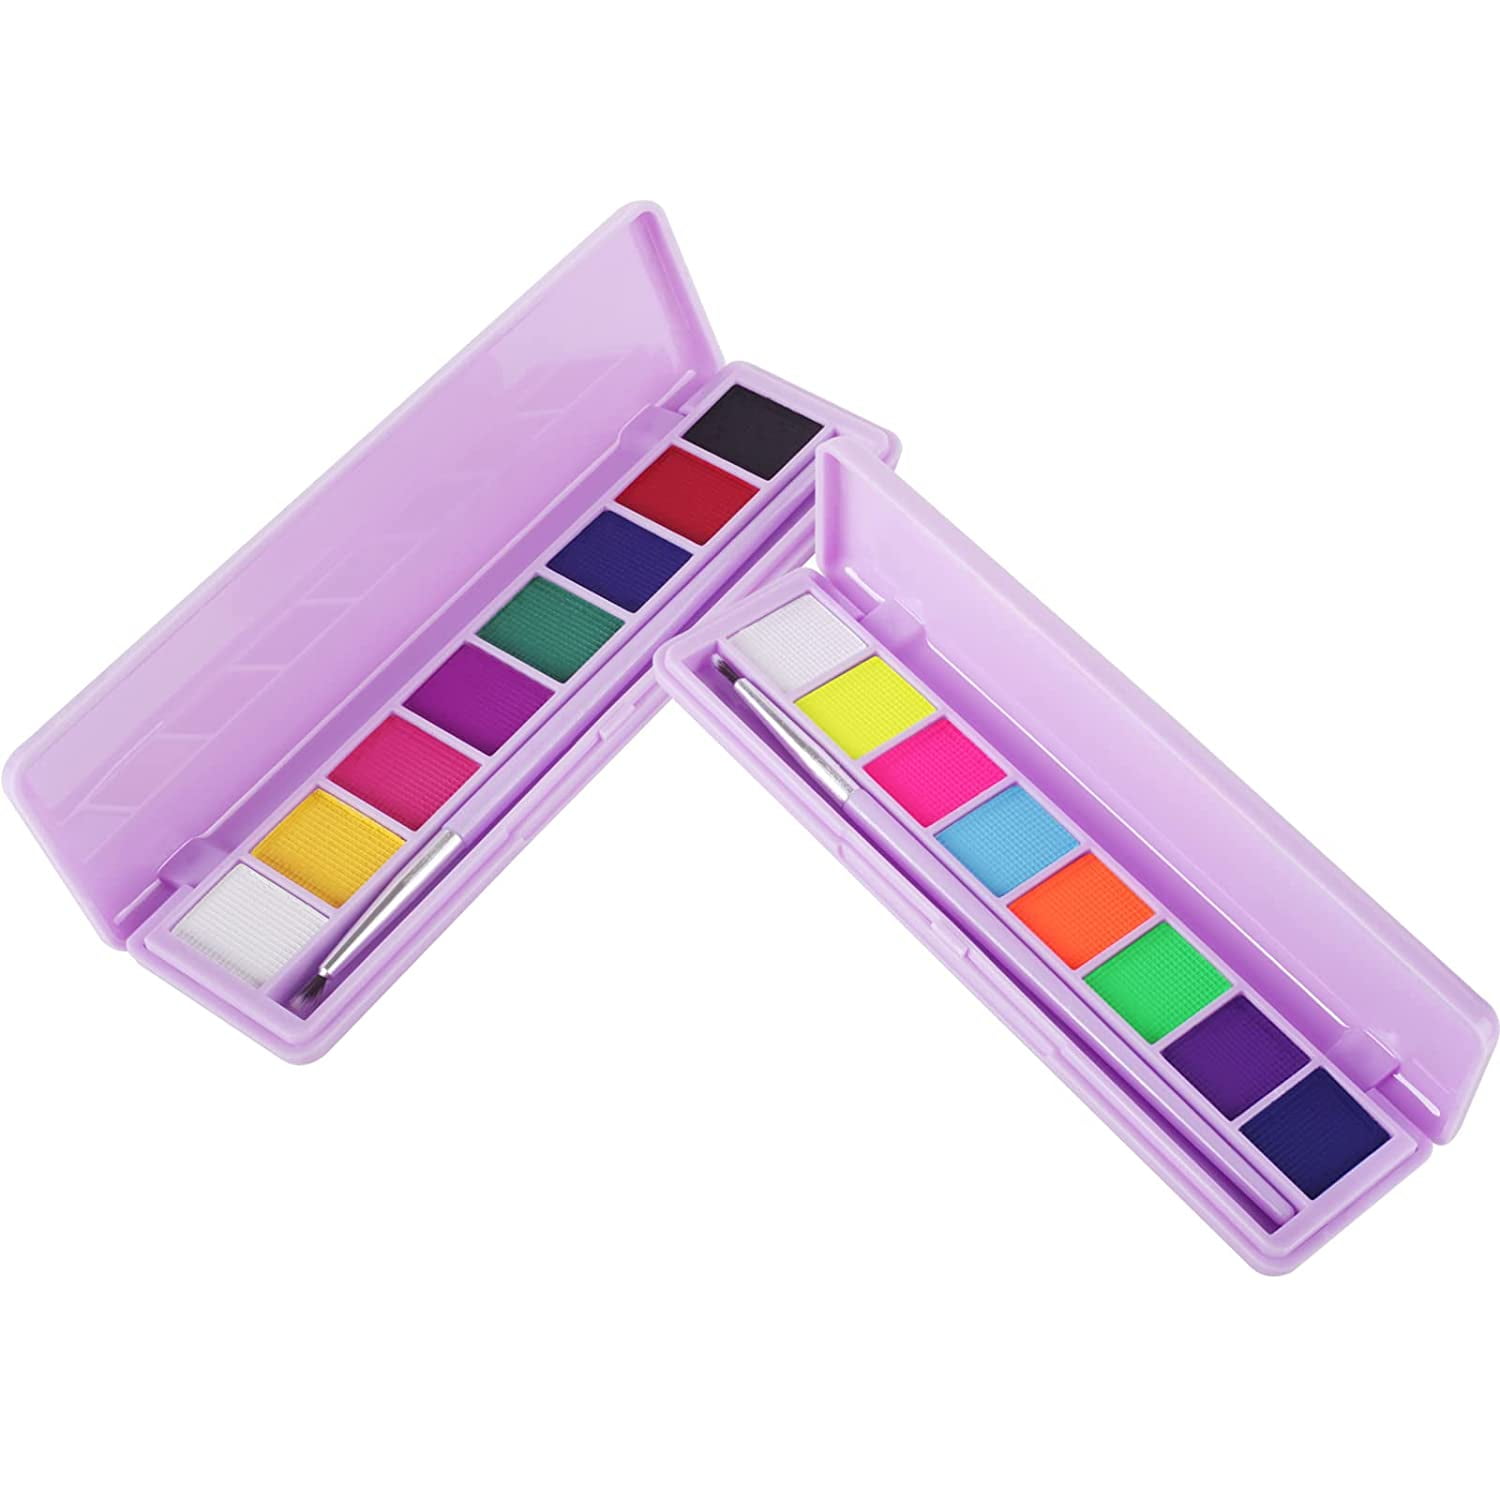  Water Activated Eyeliner Palette with Pressed Chunky Neon  Glitter , Water Activated Face Body Paint UV Glow in the Dark Black light,  Water Based Graphic Hydra Eyeliners with Cute Fruit